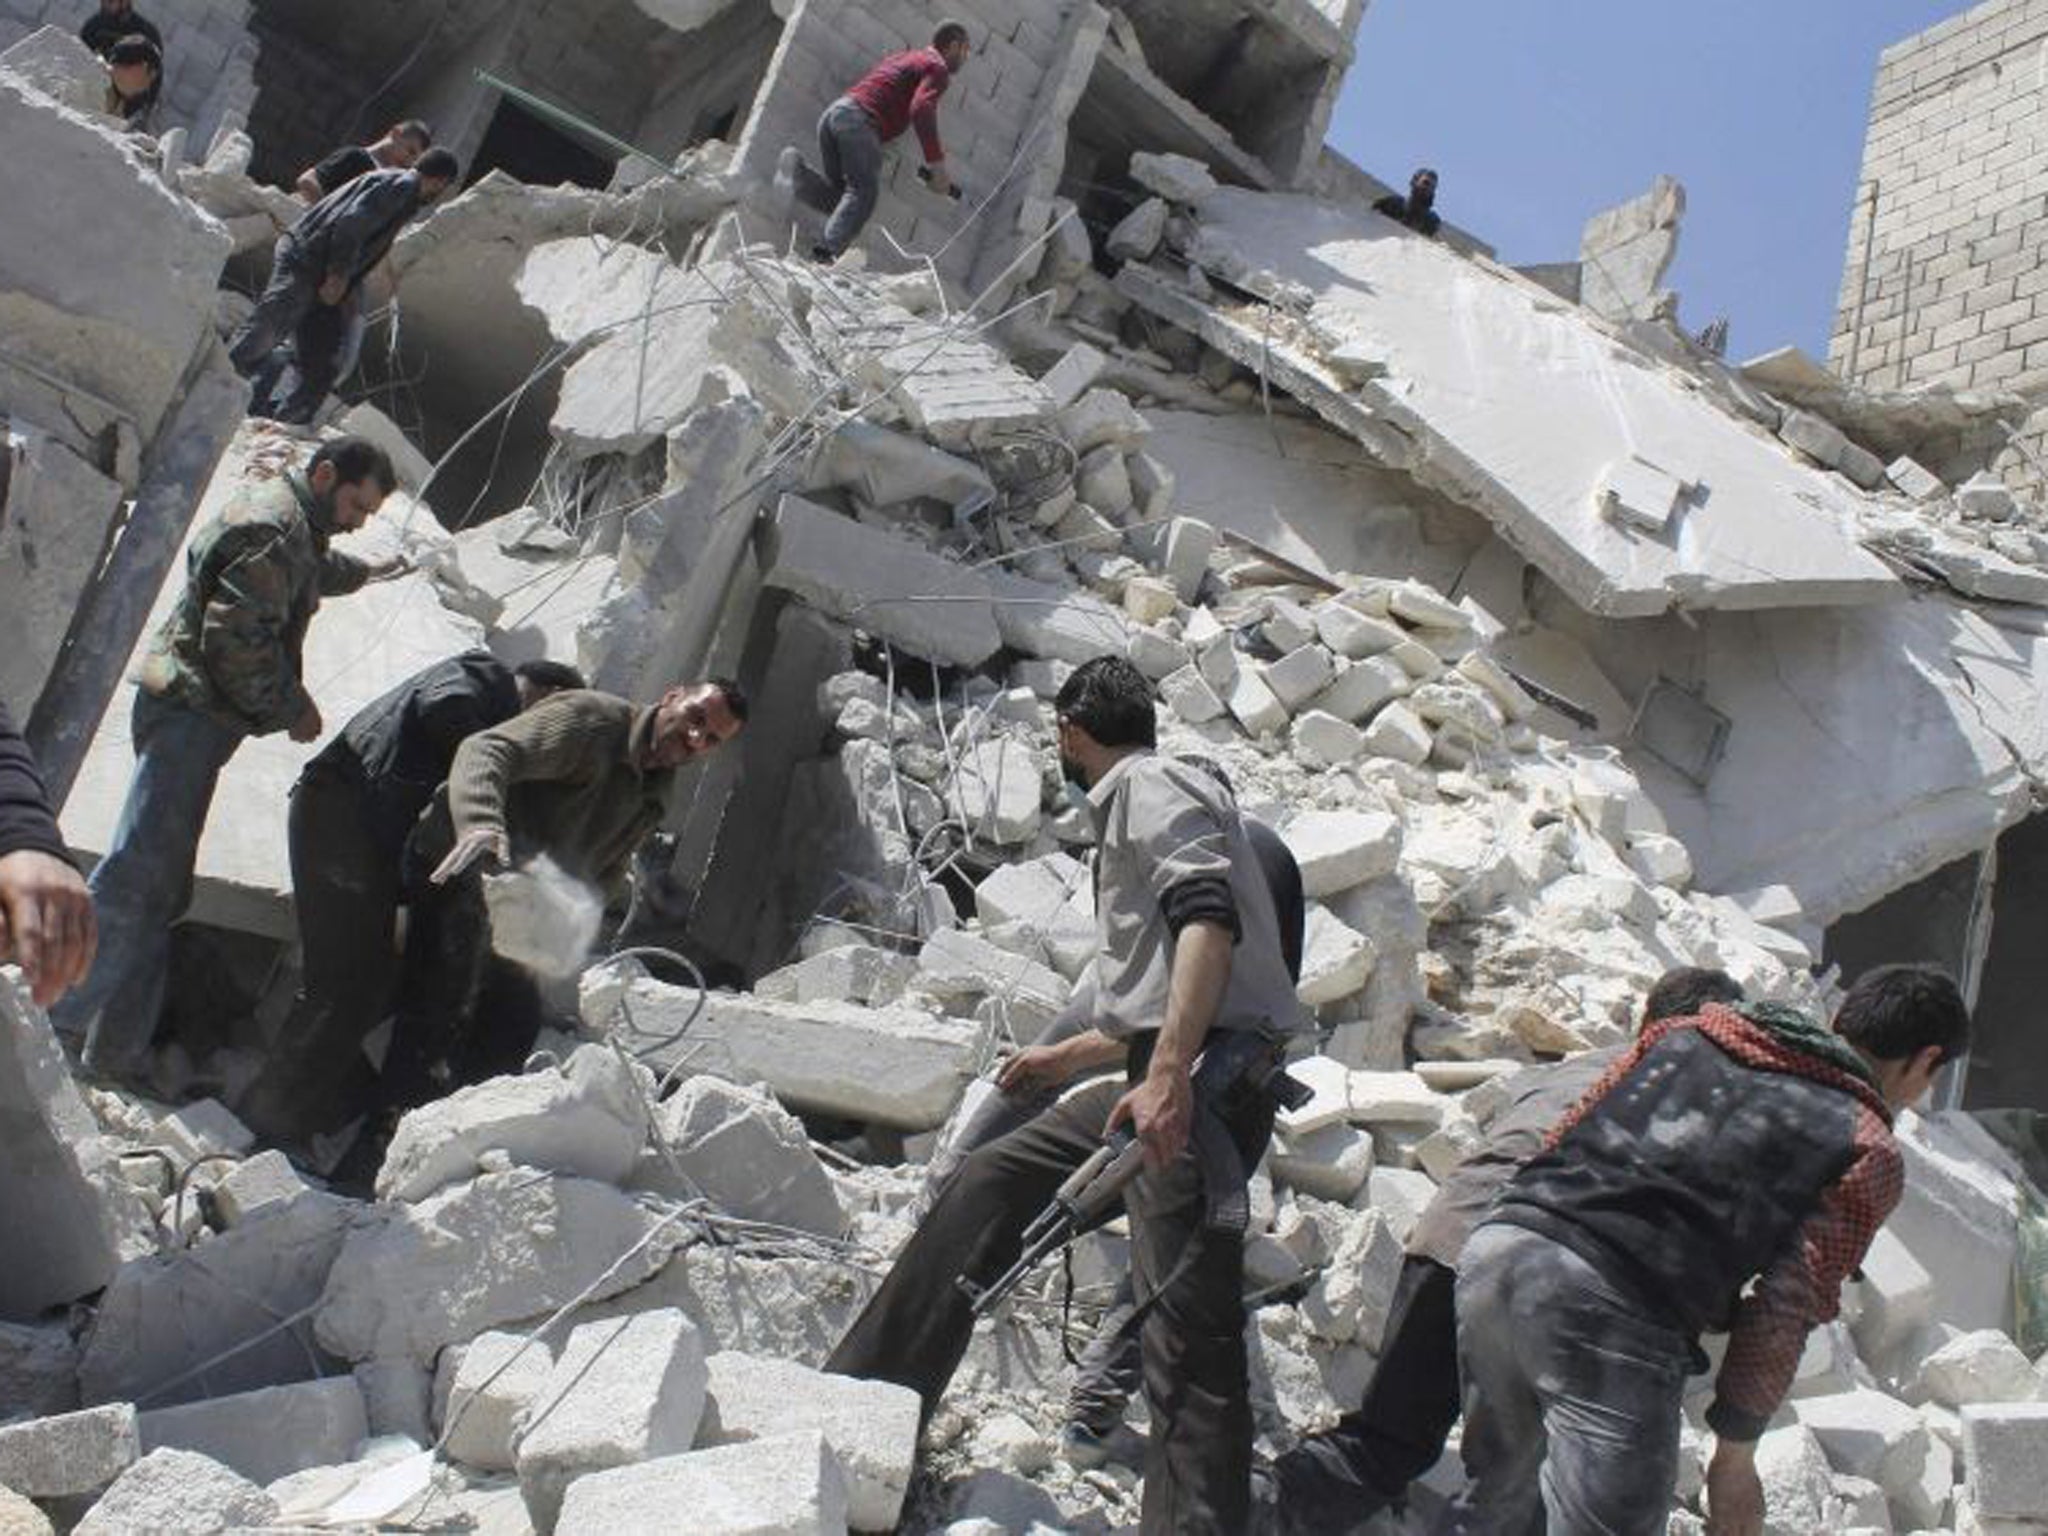 People search for casualties under the rubble at a site hit by what activists say was an air strike in Daiaat Al-Ansari neighborhood, Aleppo, on Saturday